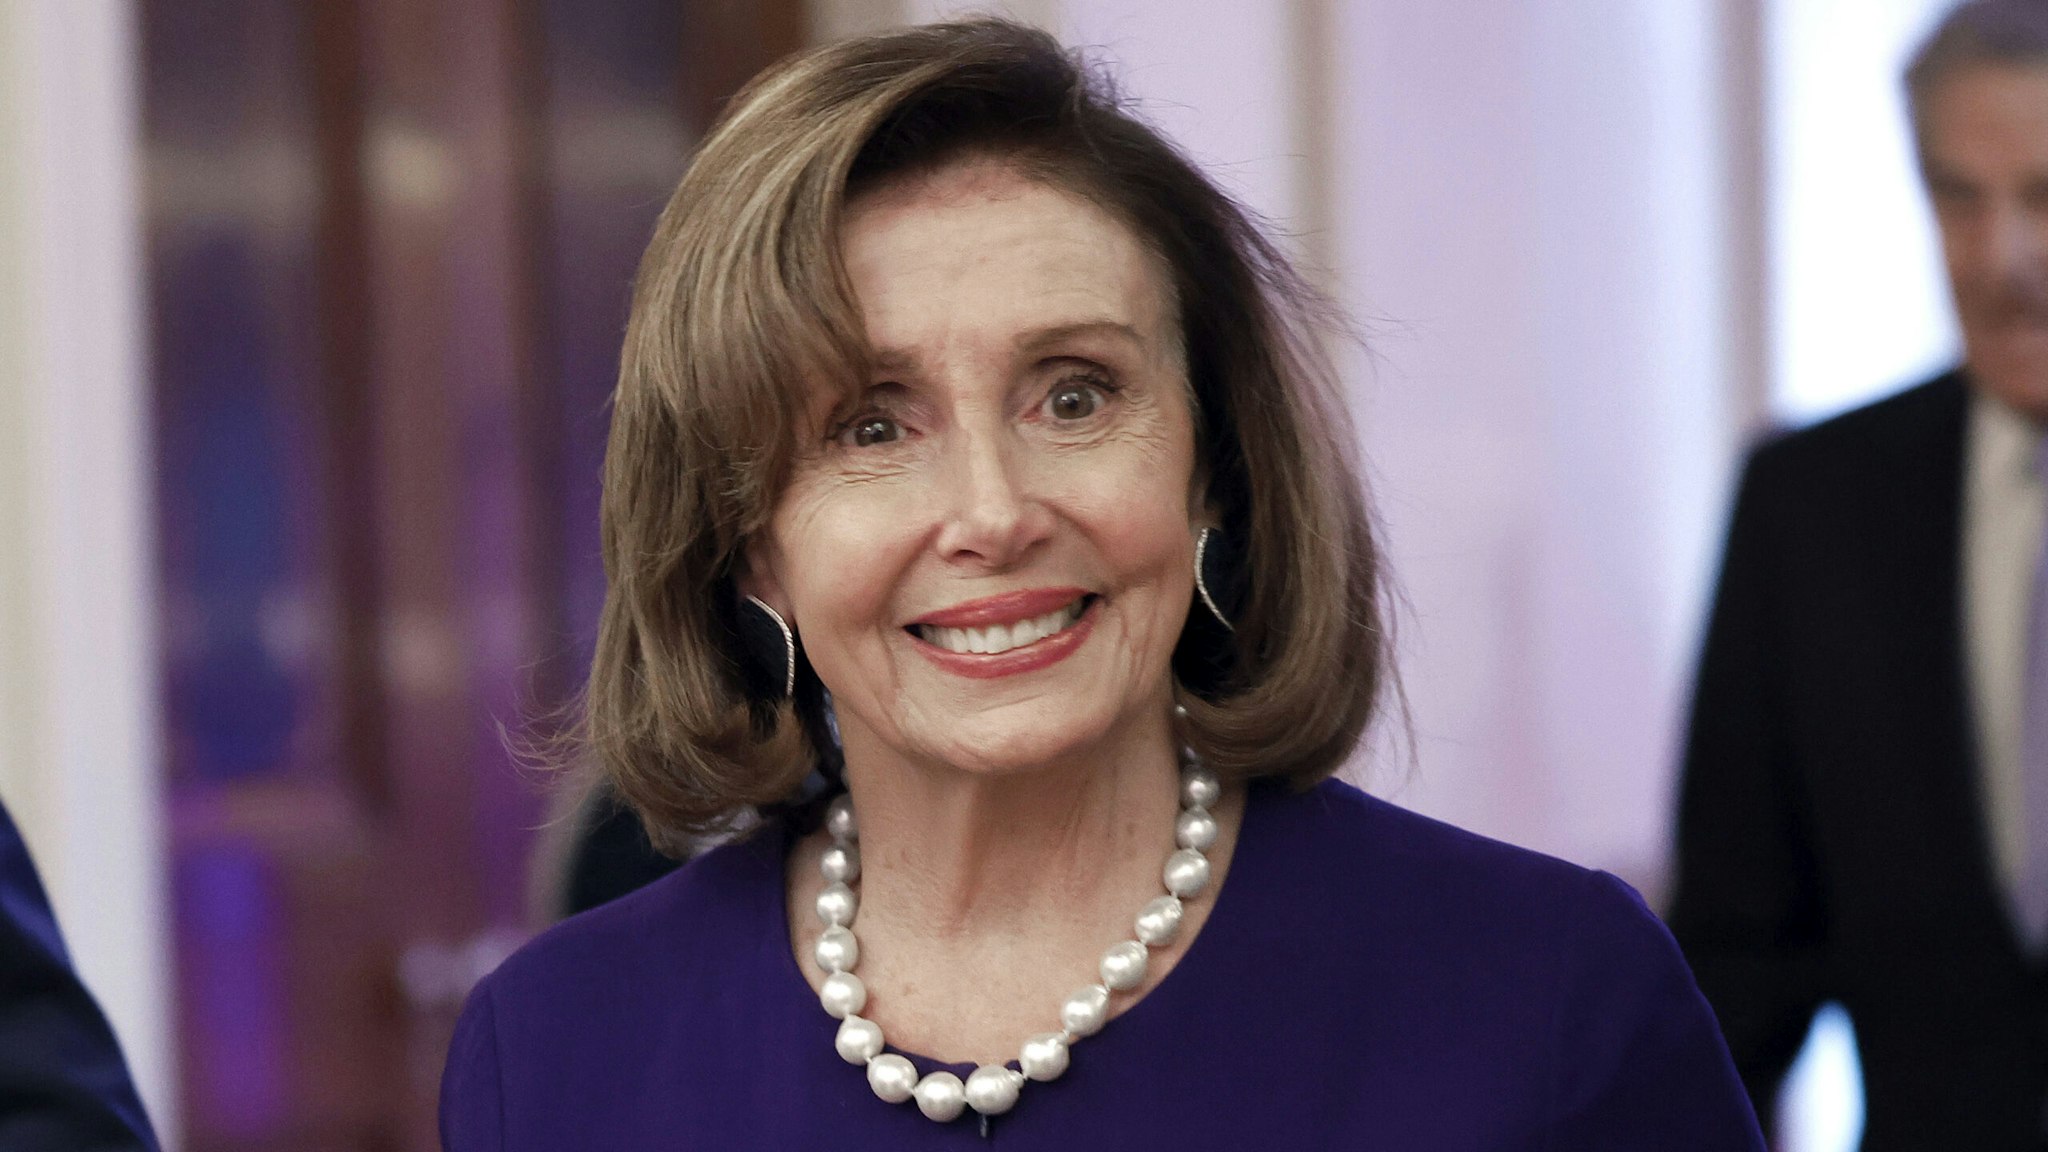 WASHINGTON, DC - MAY 16: Speaker of the House Nancy Pelosi (D-CA) (R) arrives for a reception honoring Greek Prime Minister Kyriakos Mitsotakis and his wife Mareva Mitsotakis in the East Room of the White House on May 16, 2022 in Washington, DC. U.S. President Joe Biden hosted Mitsotakis for bilateral meetings earlier in the day where they talked about allied efforts to "support the people of Ukraine and impose economic costs on Russia for its unprovoked aggression," according to the White House.